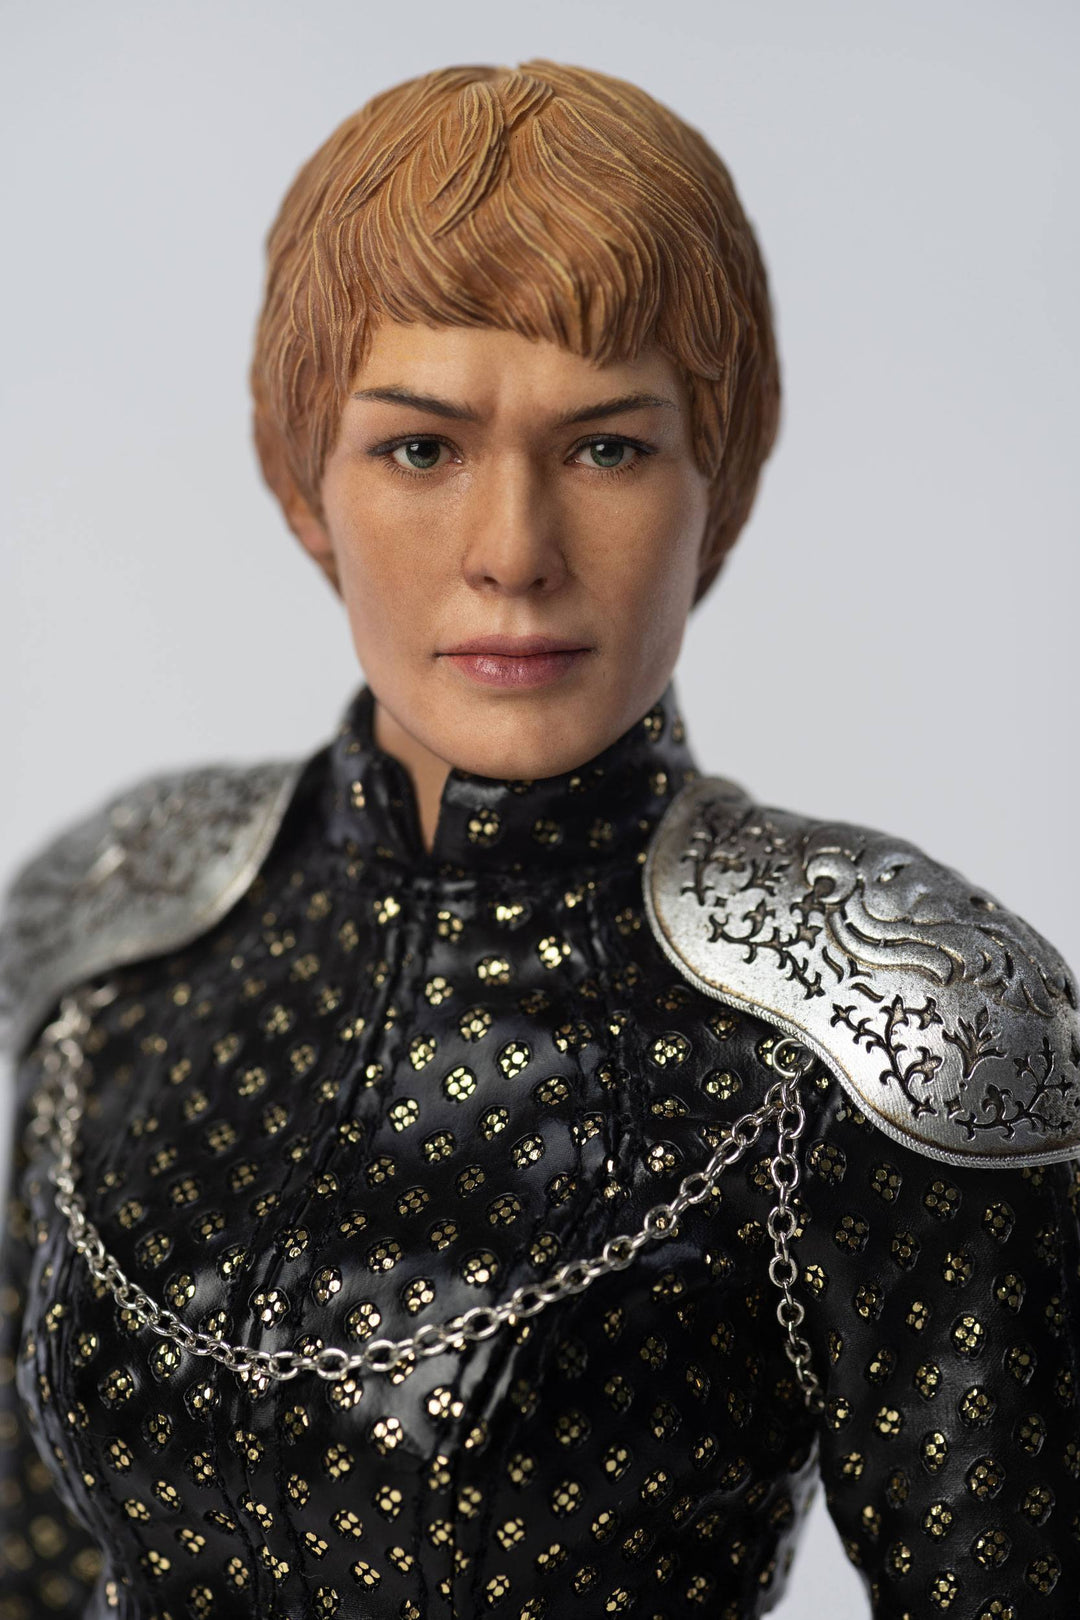 Game of Thrones Cersei Lannister 1/6th Scale Figure